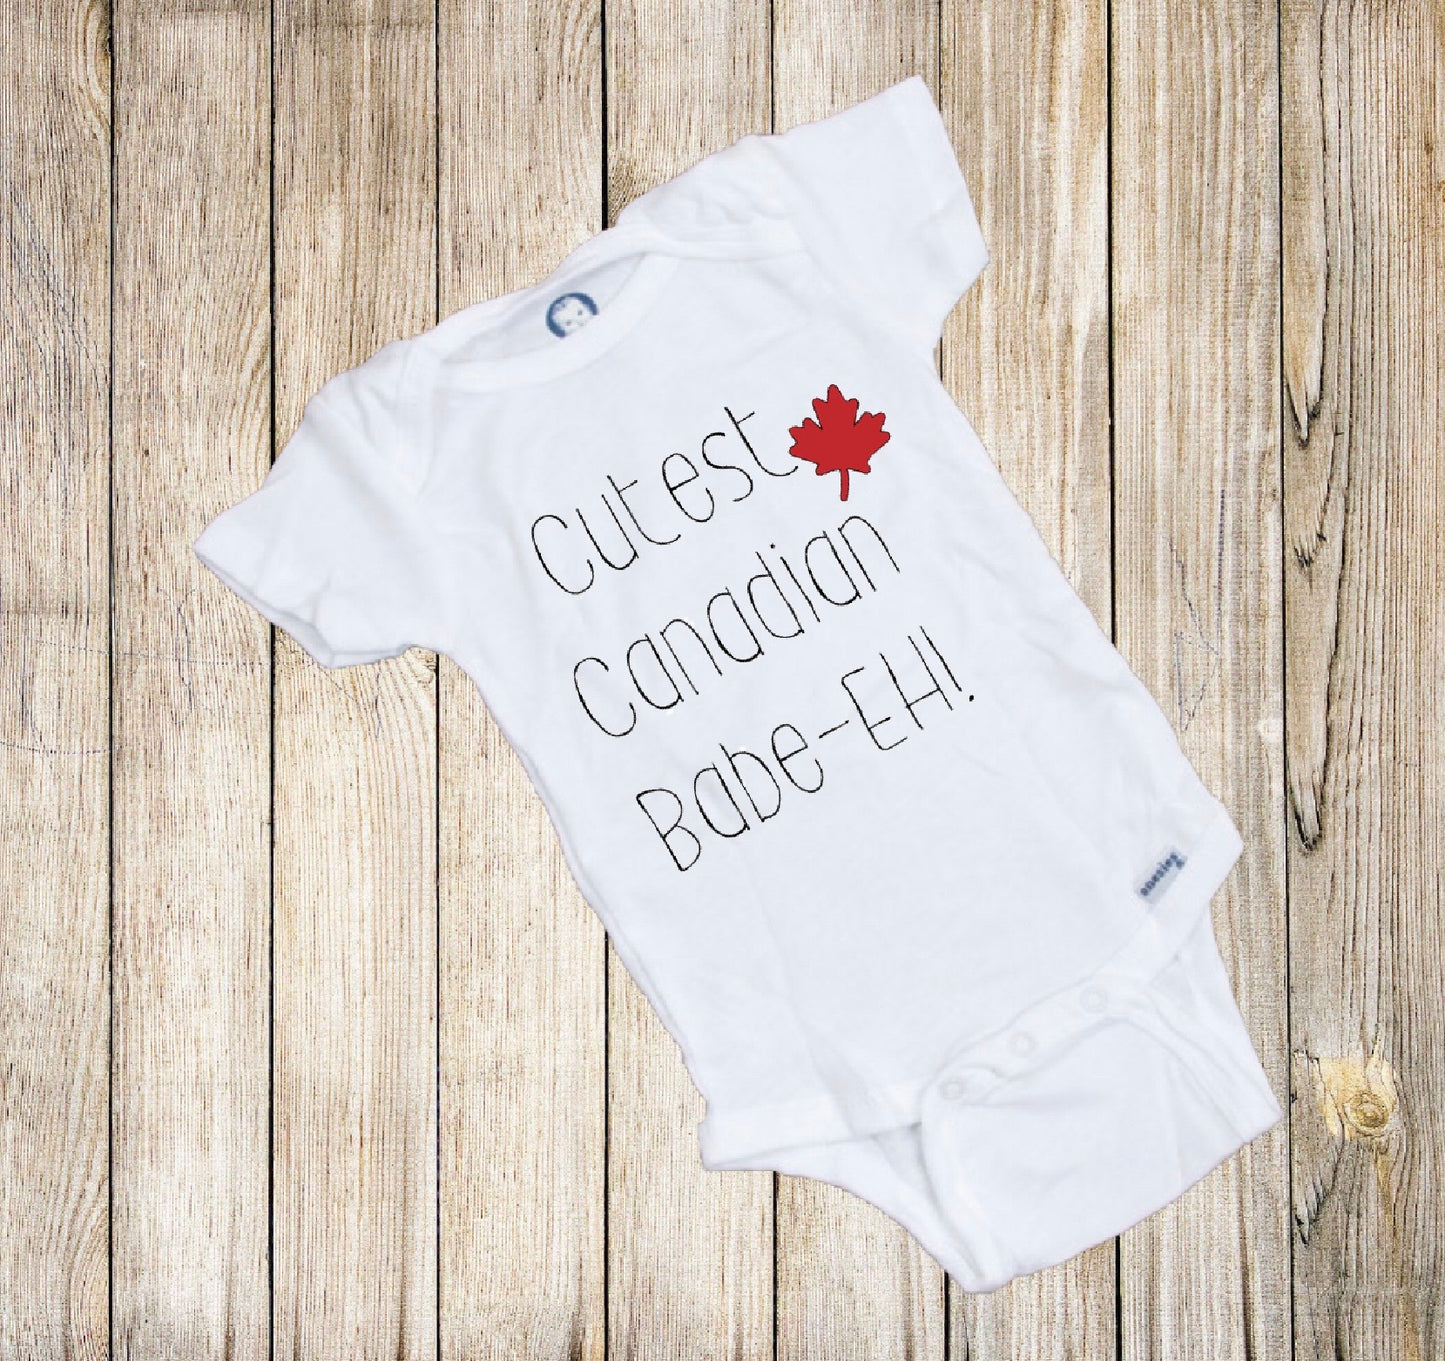 Cutest Canadian Babe-Eh! Baby Onesie®